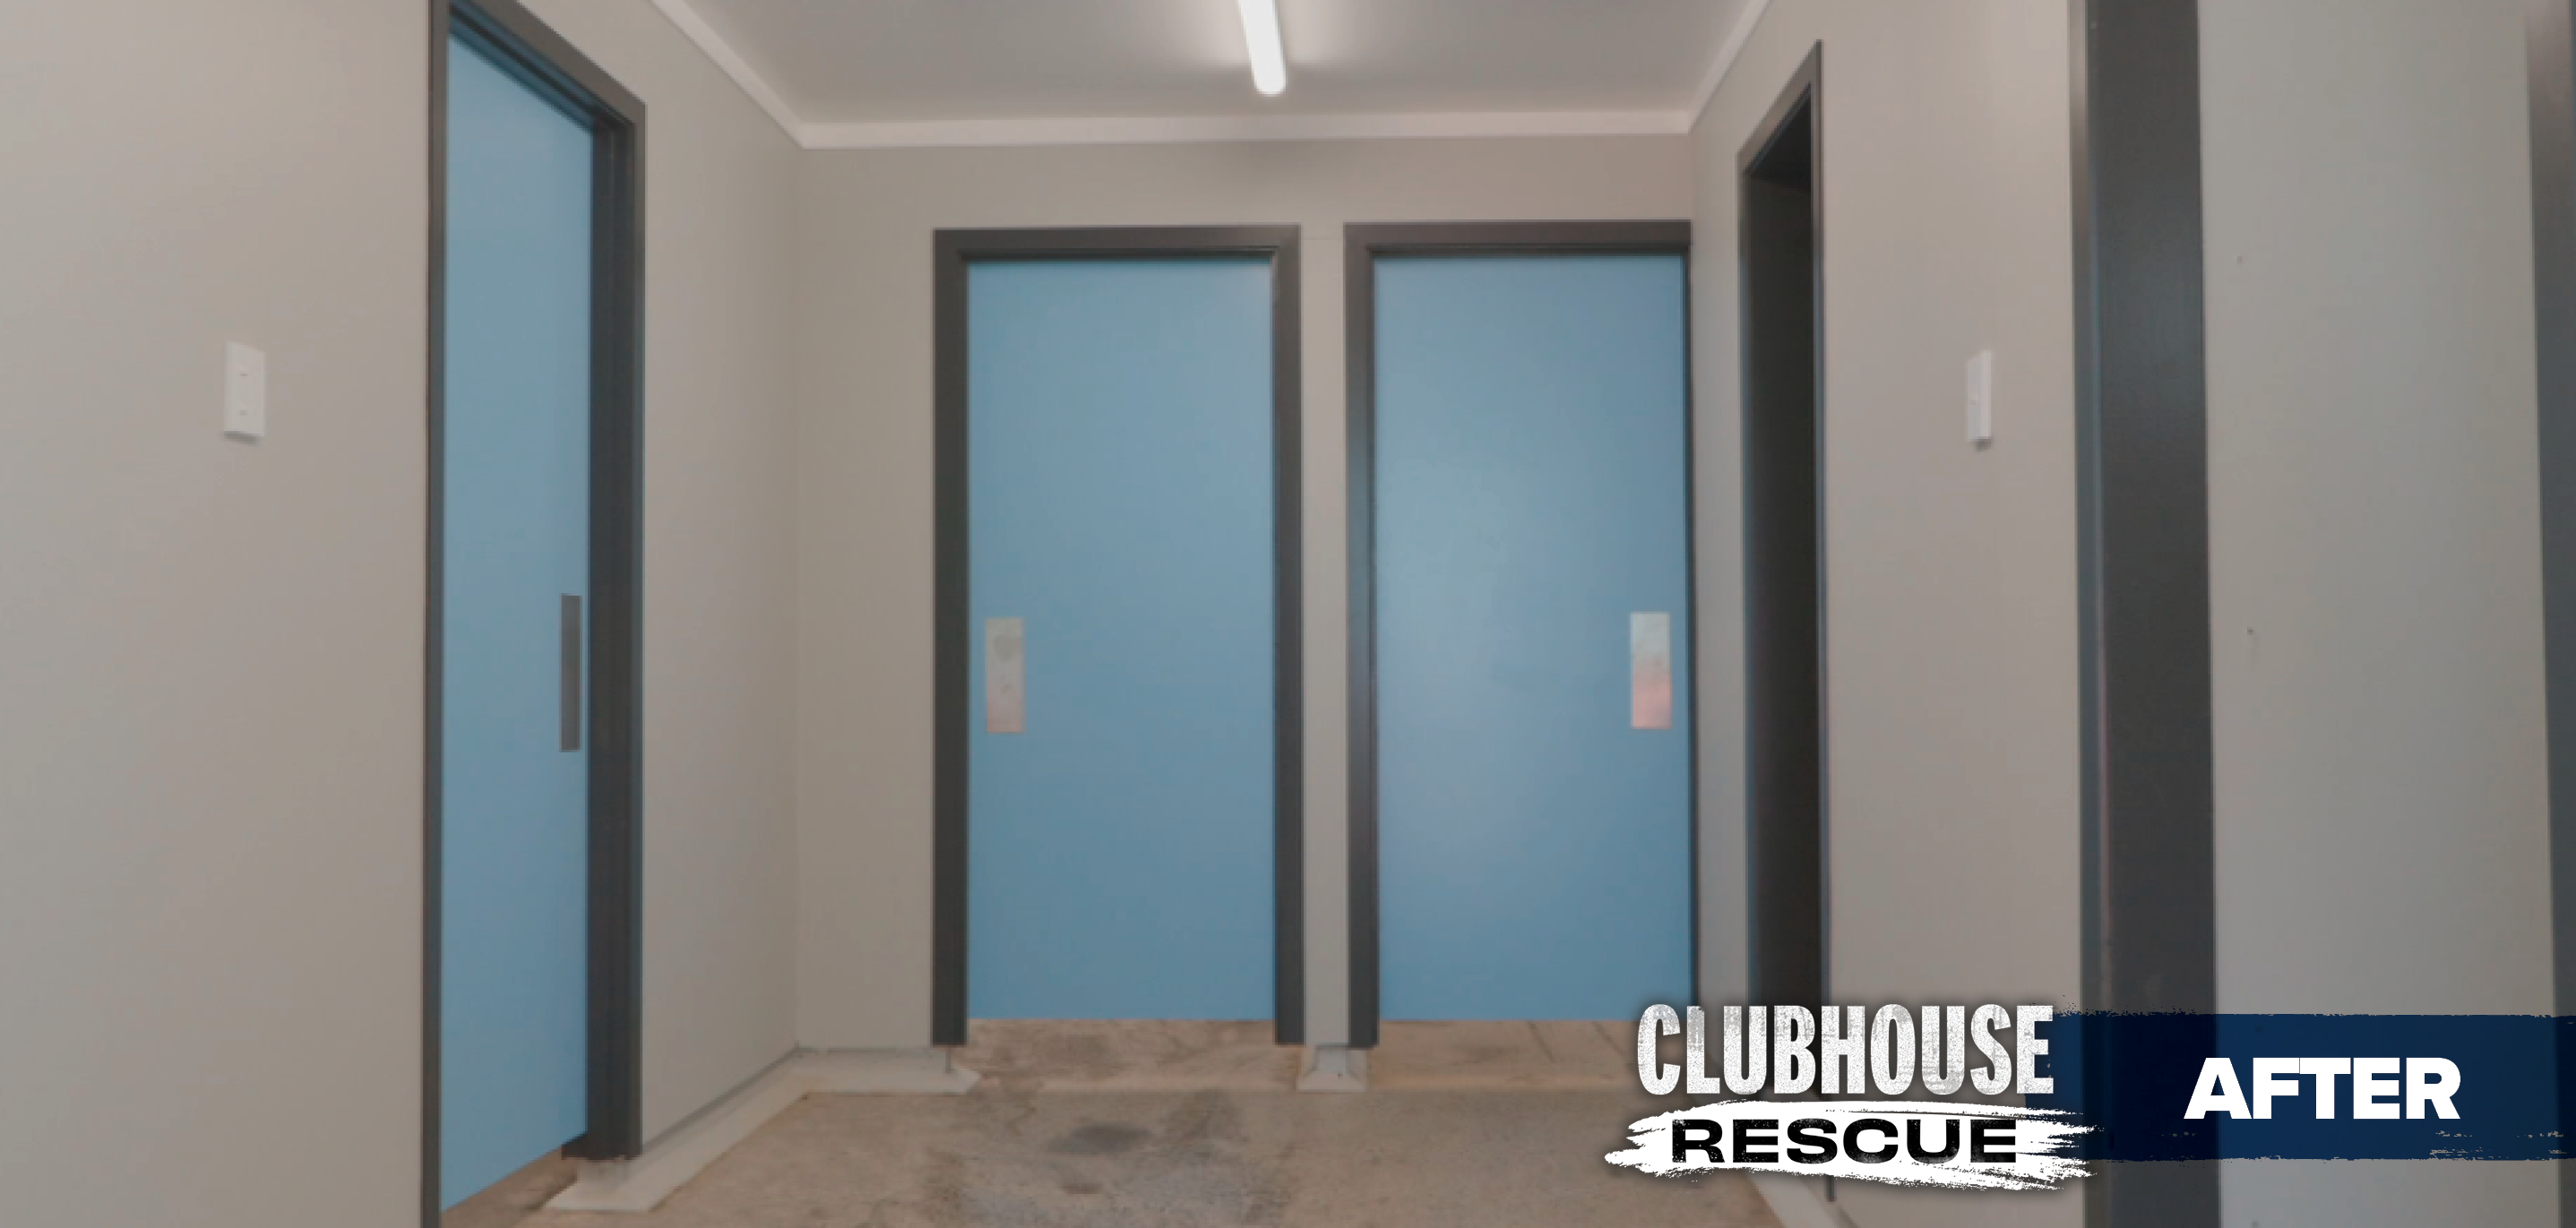 Clubhouse Ep 3 - After Photo 1